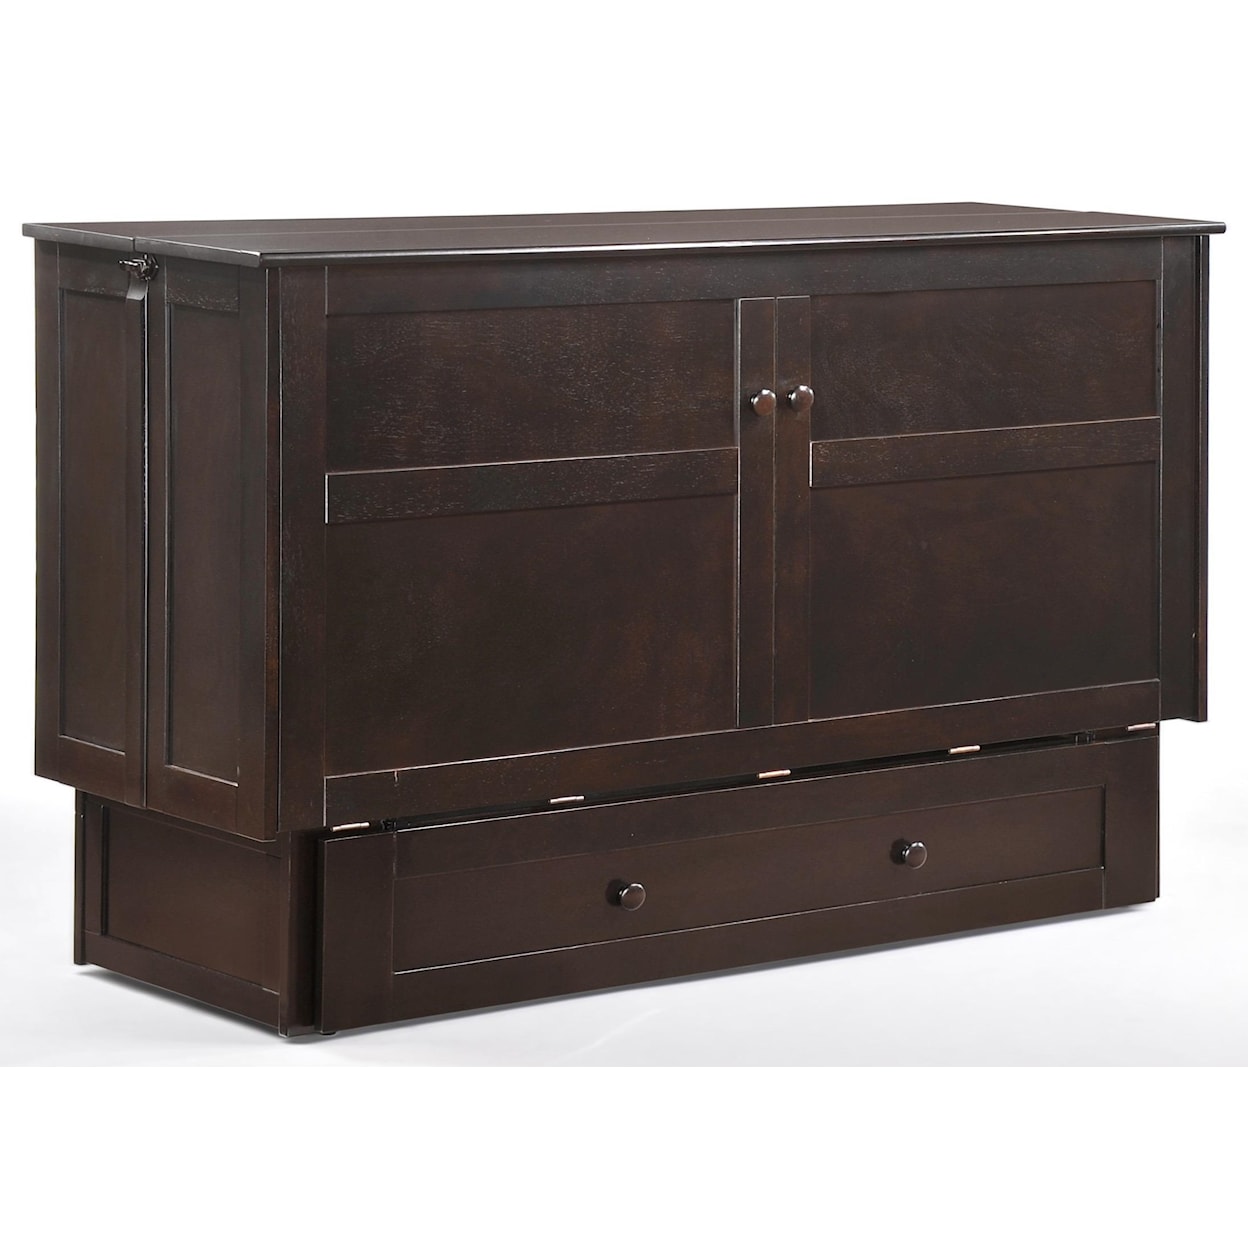 Night & Day Furniture Clover Cabinet Bed